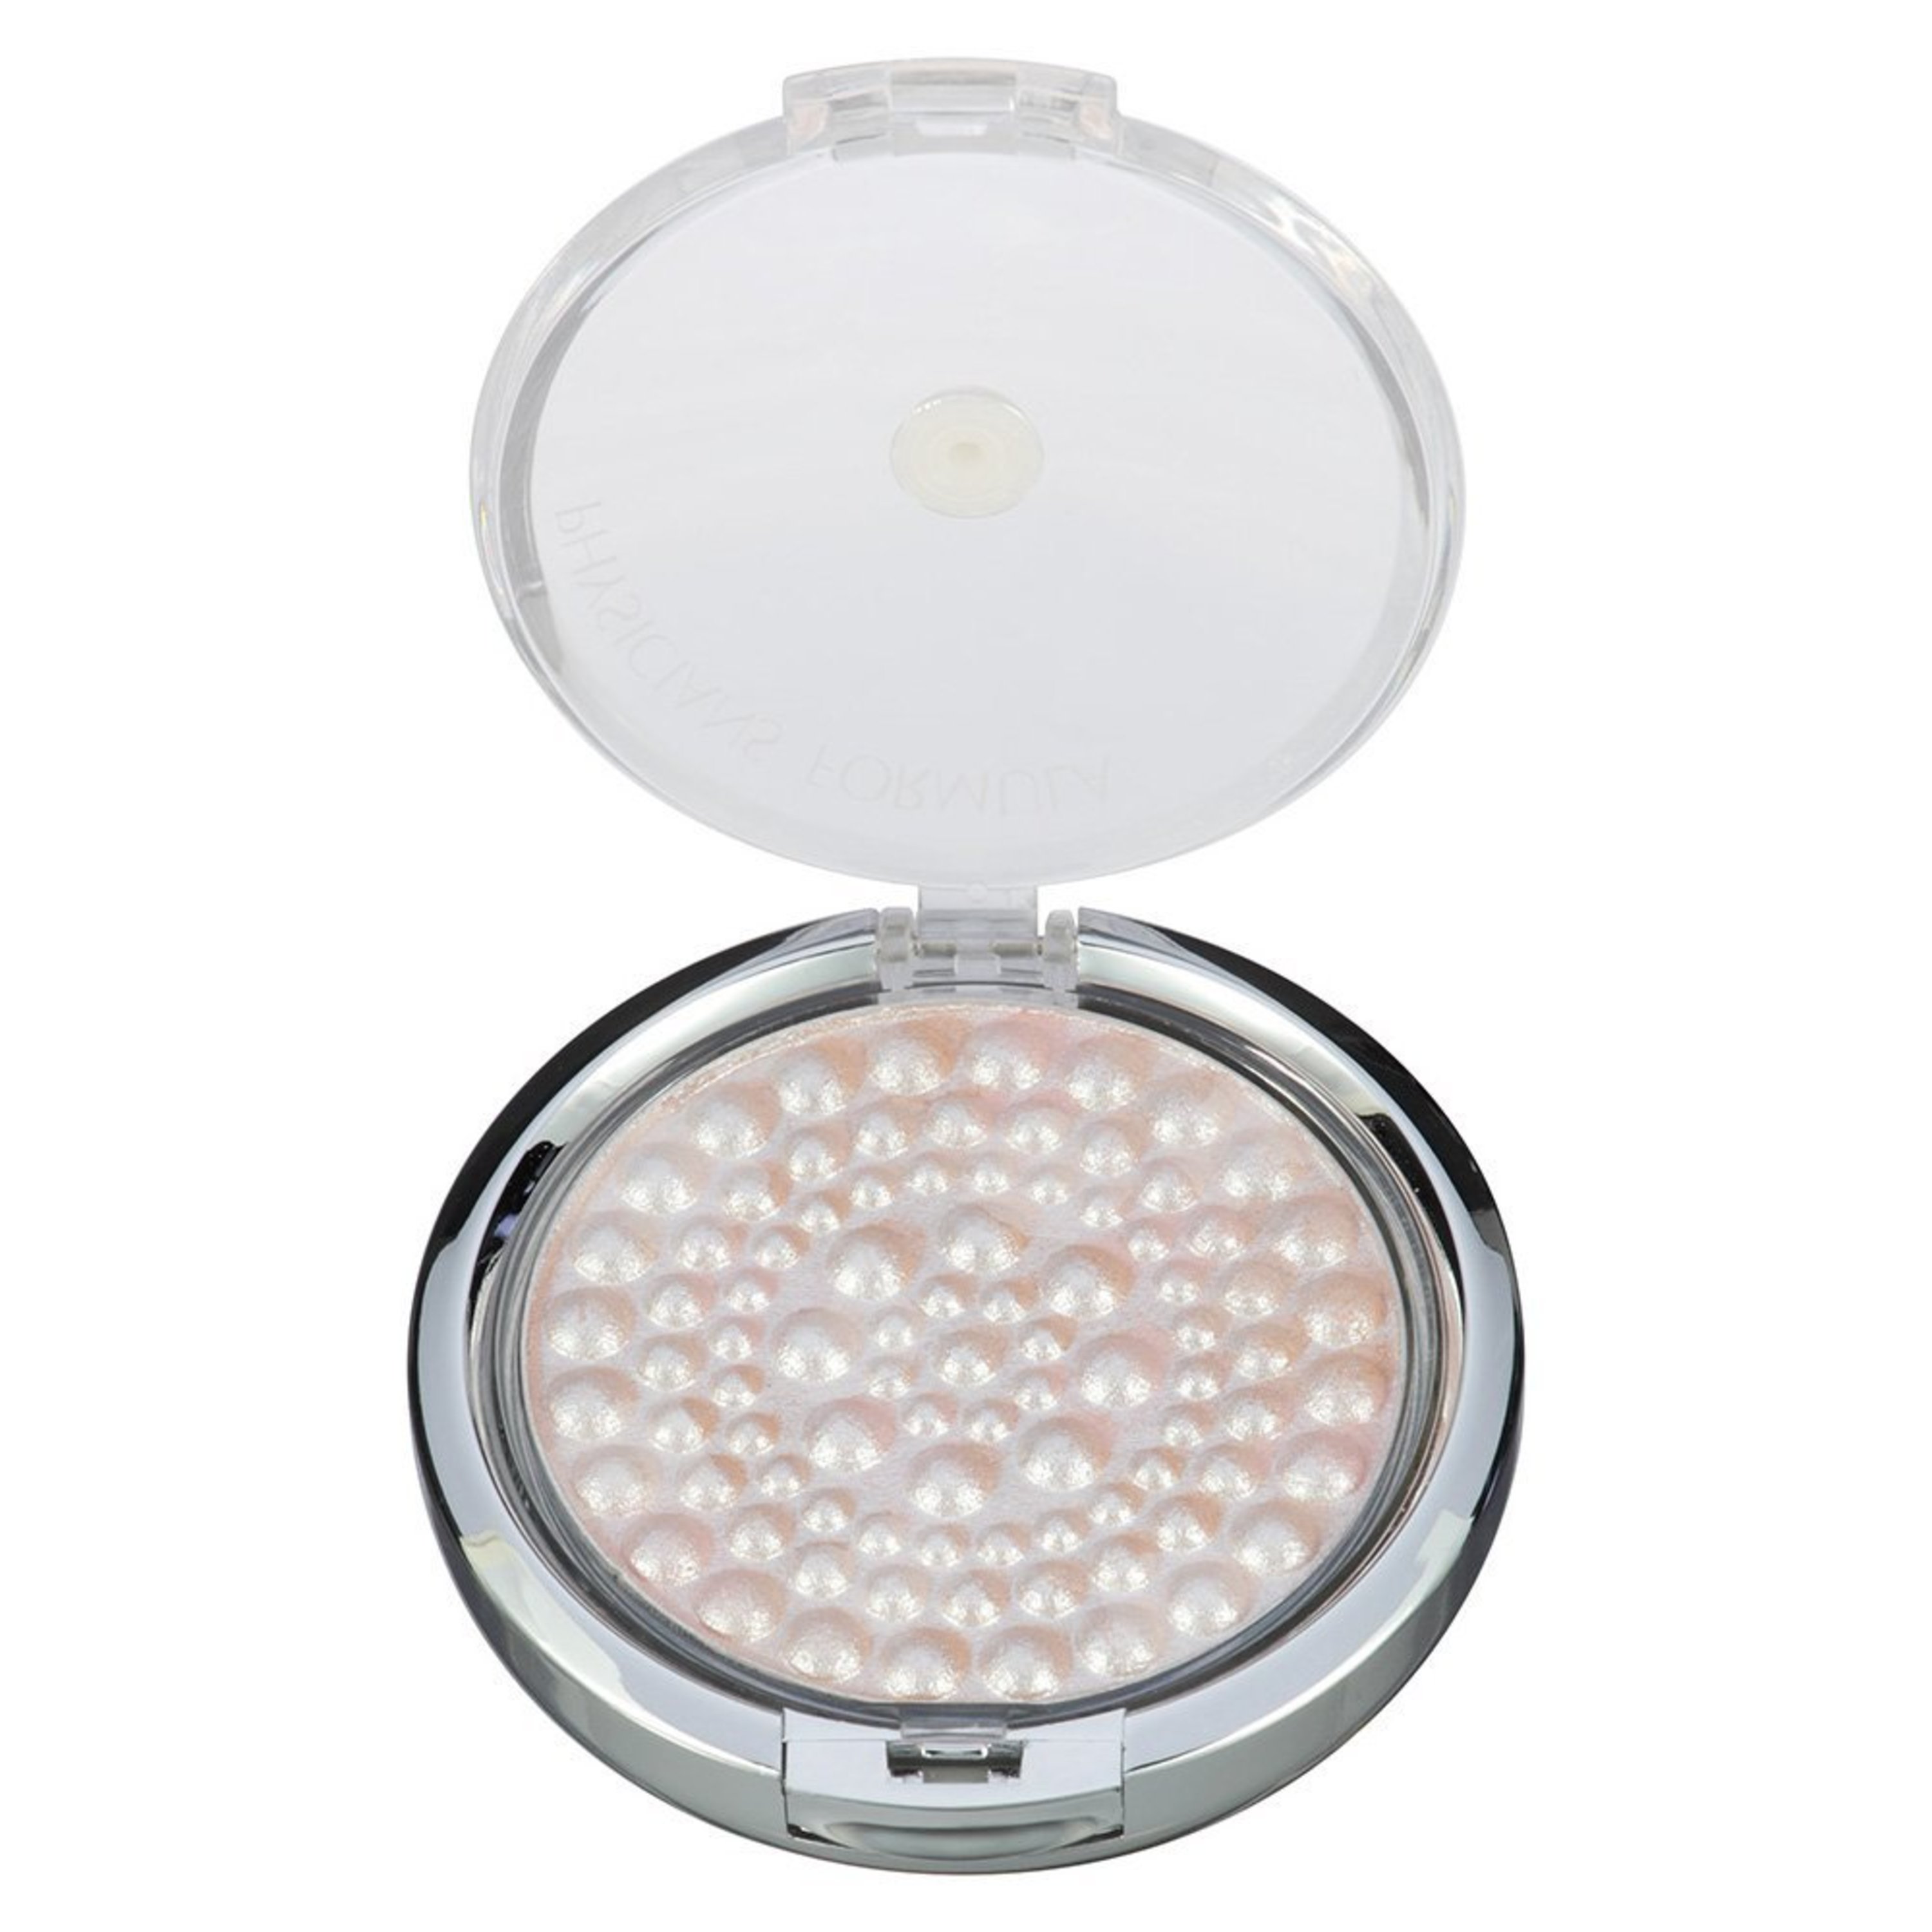 Physicians Formula Powder Palette® Mineral Glow Pearls, Translucent Pearl - image 1 of 3